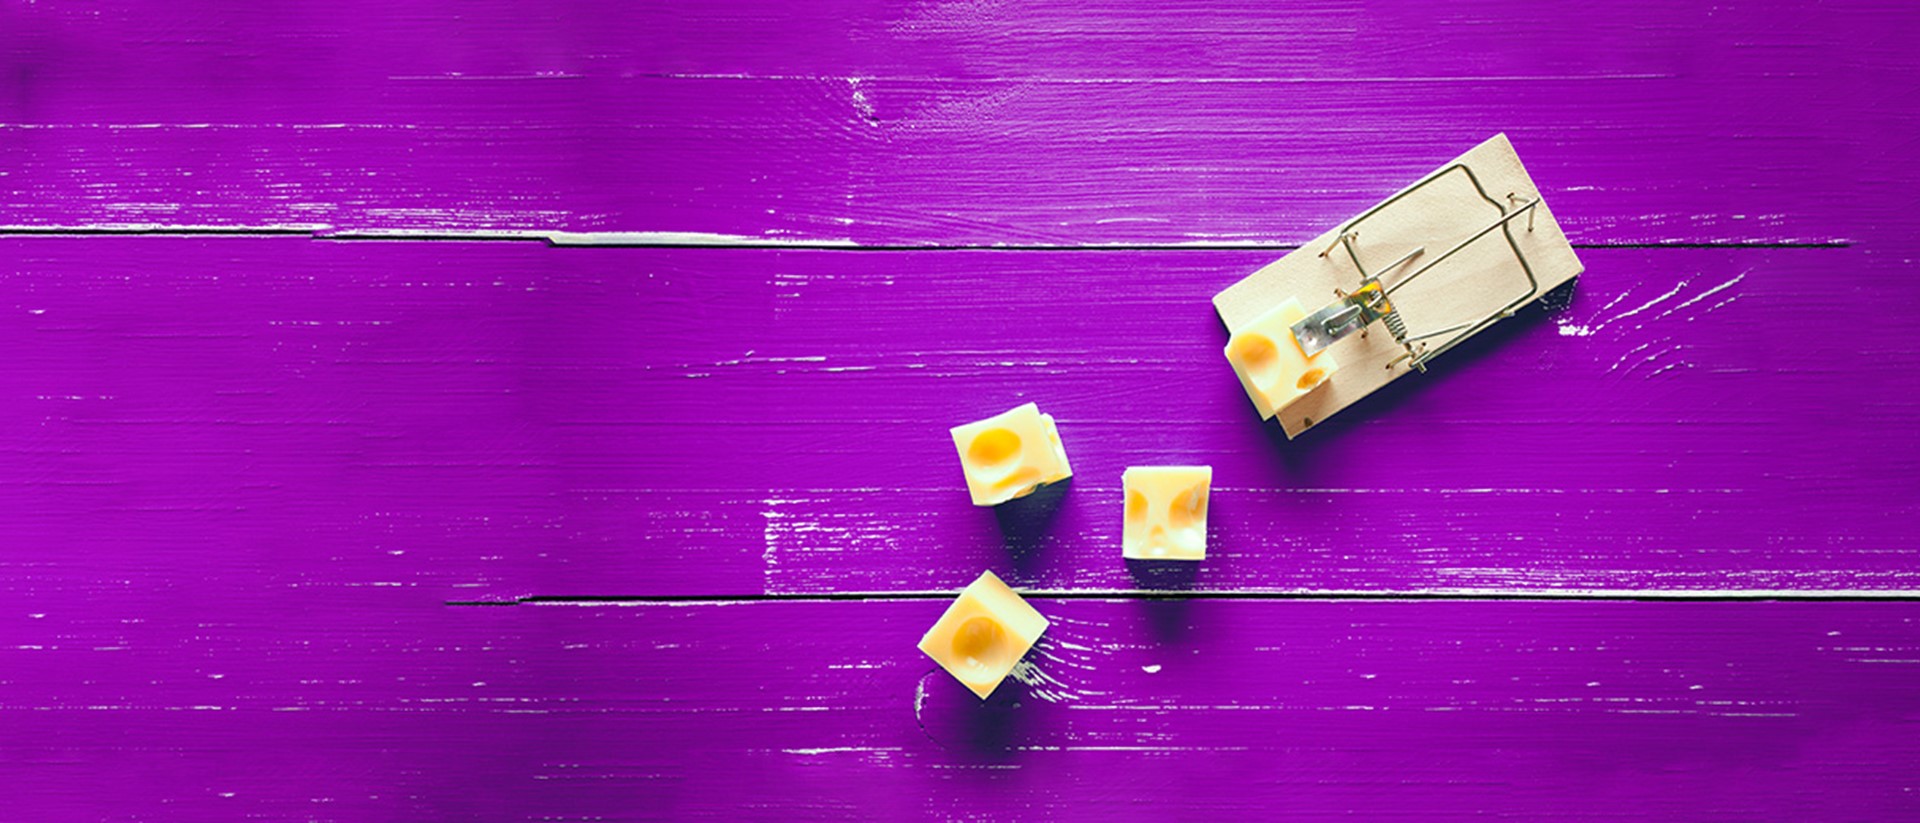 Image of a mousetrap with cheese on a purple background